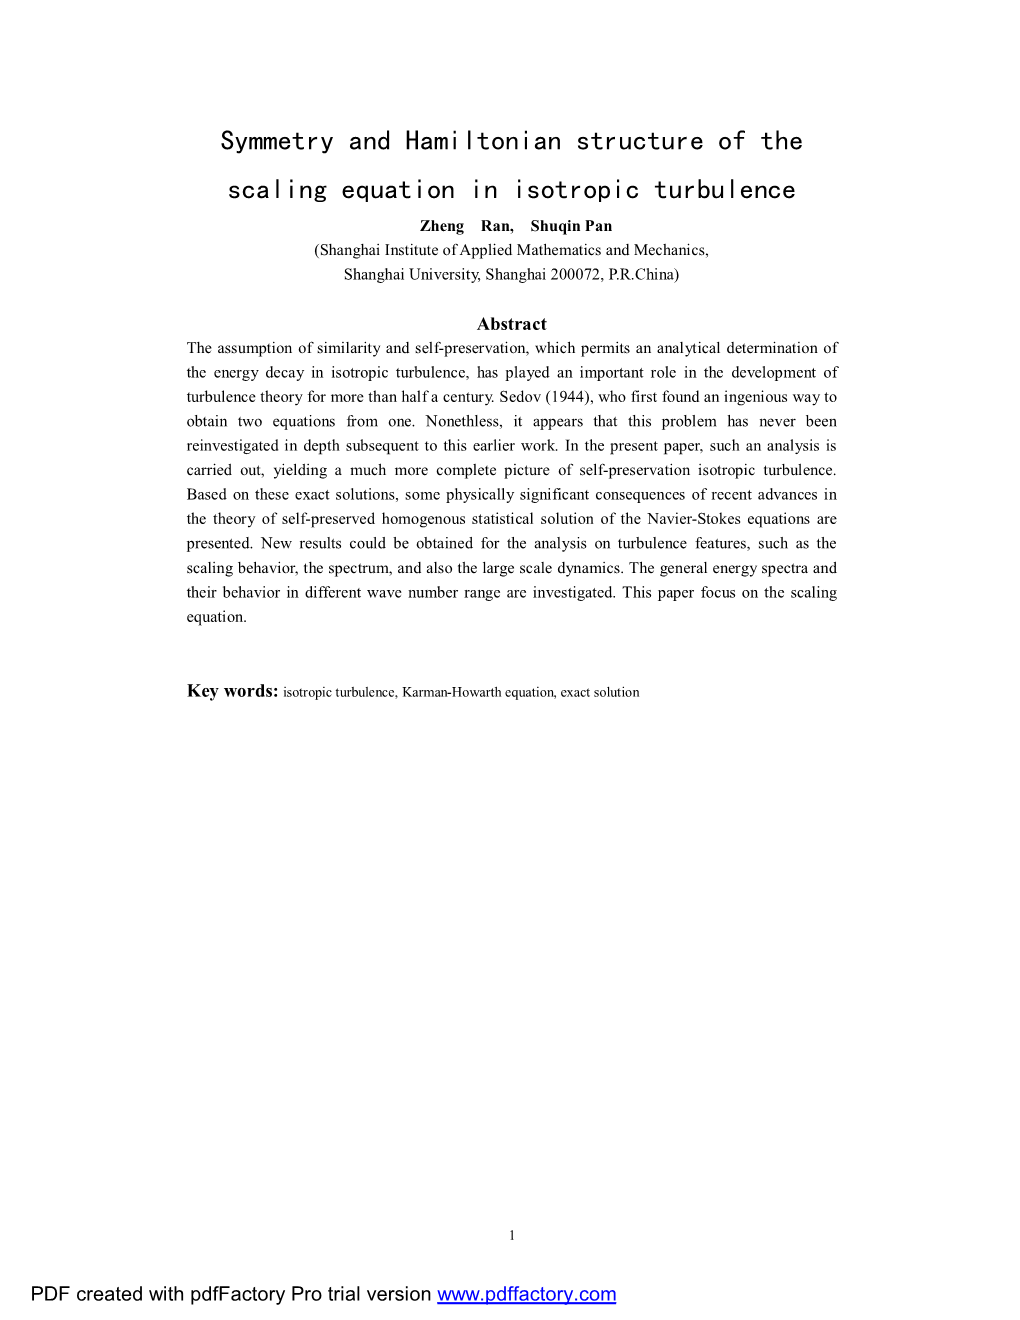 Symmetry and Hamiltonian Structure of the Scaling Equation in Isotropic